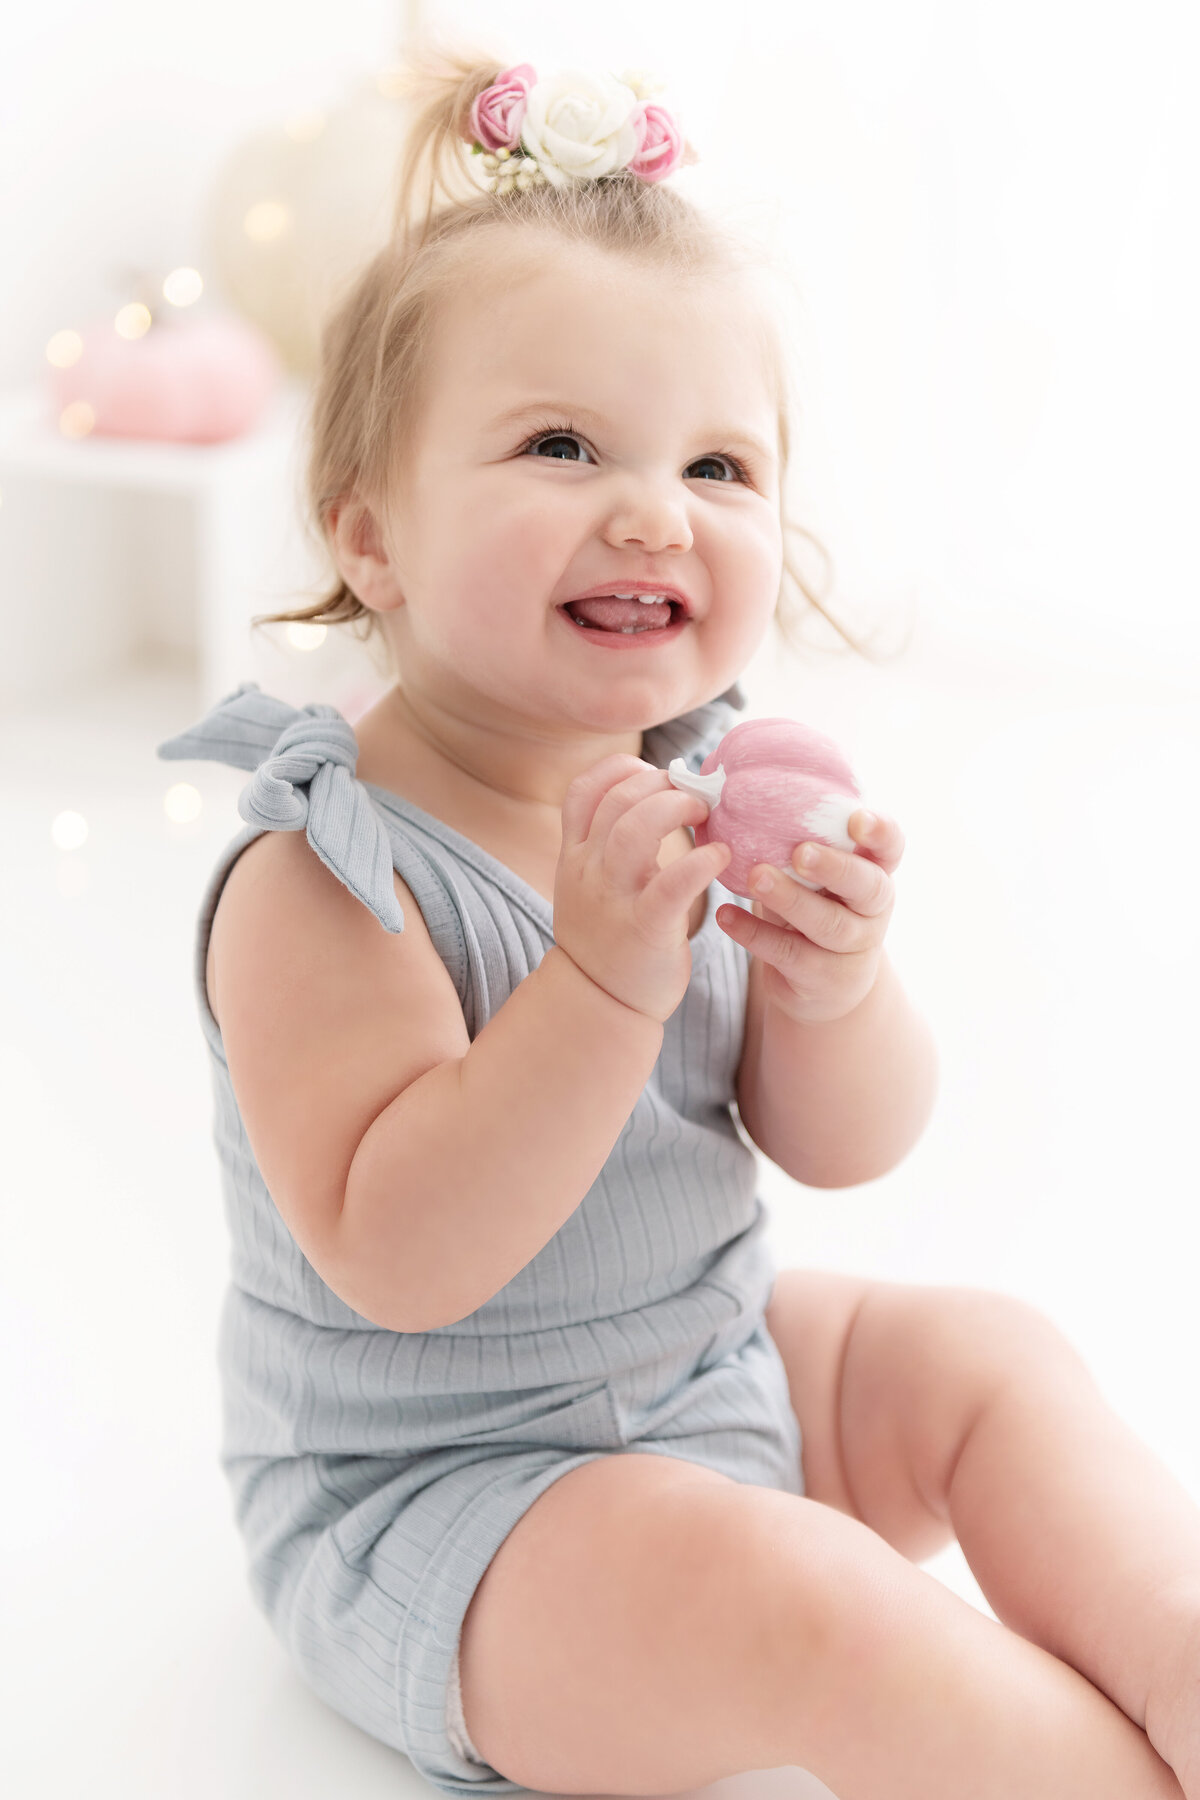 A toddler girl in a blue romper plays with a pink toy happily in a studio